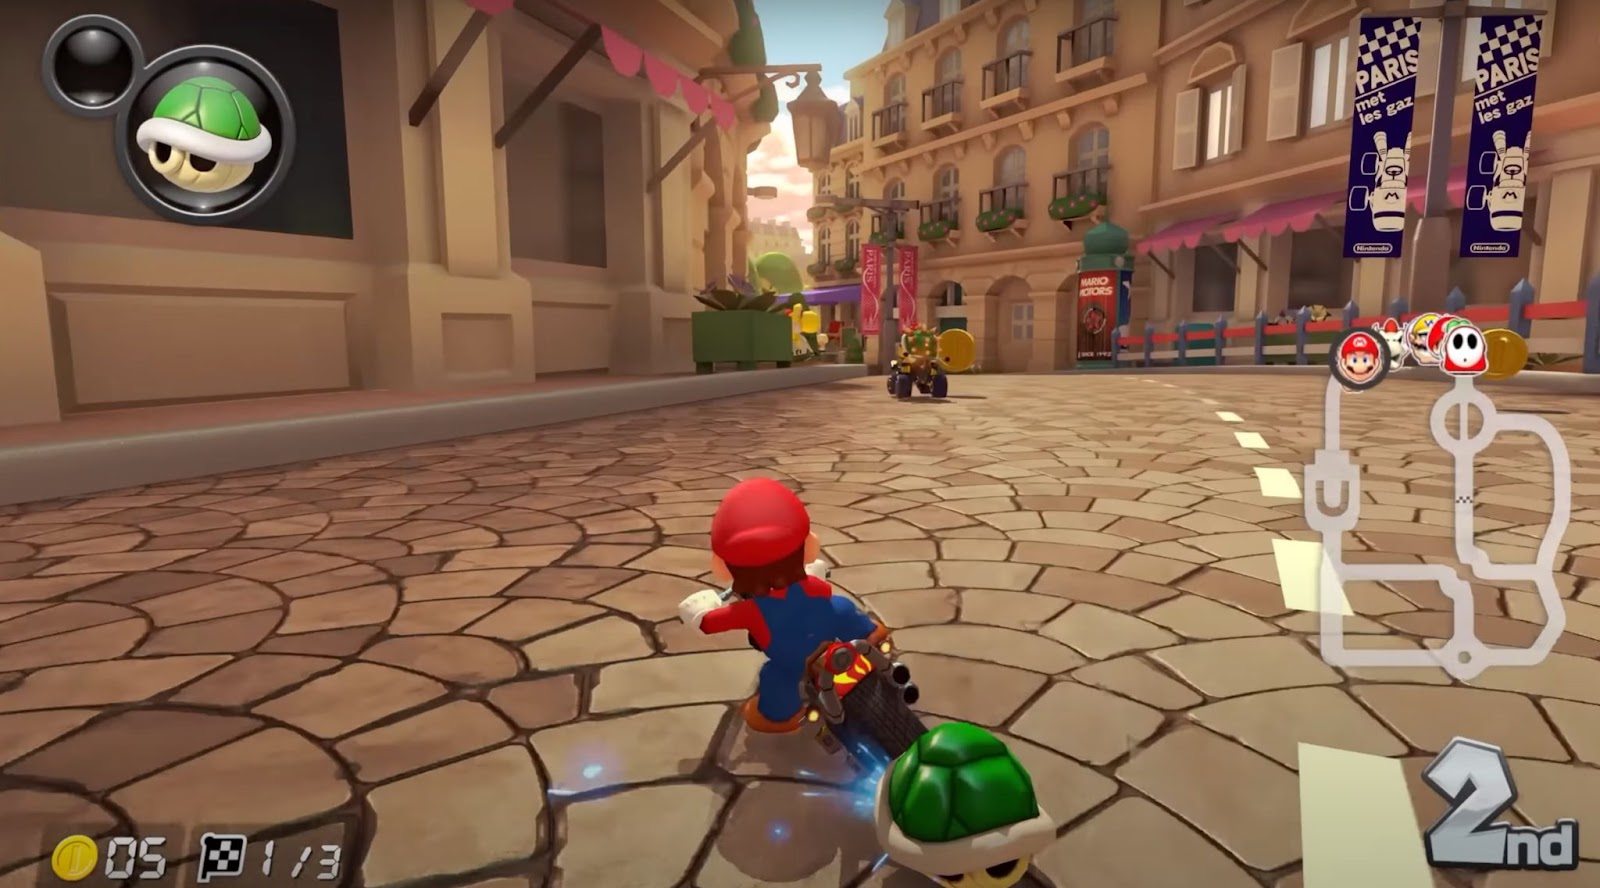 Find The Best Car For Your Mario Kart 8 Adventure